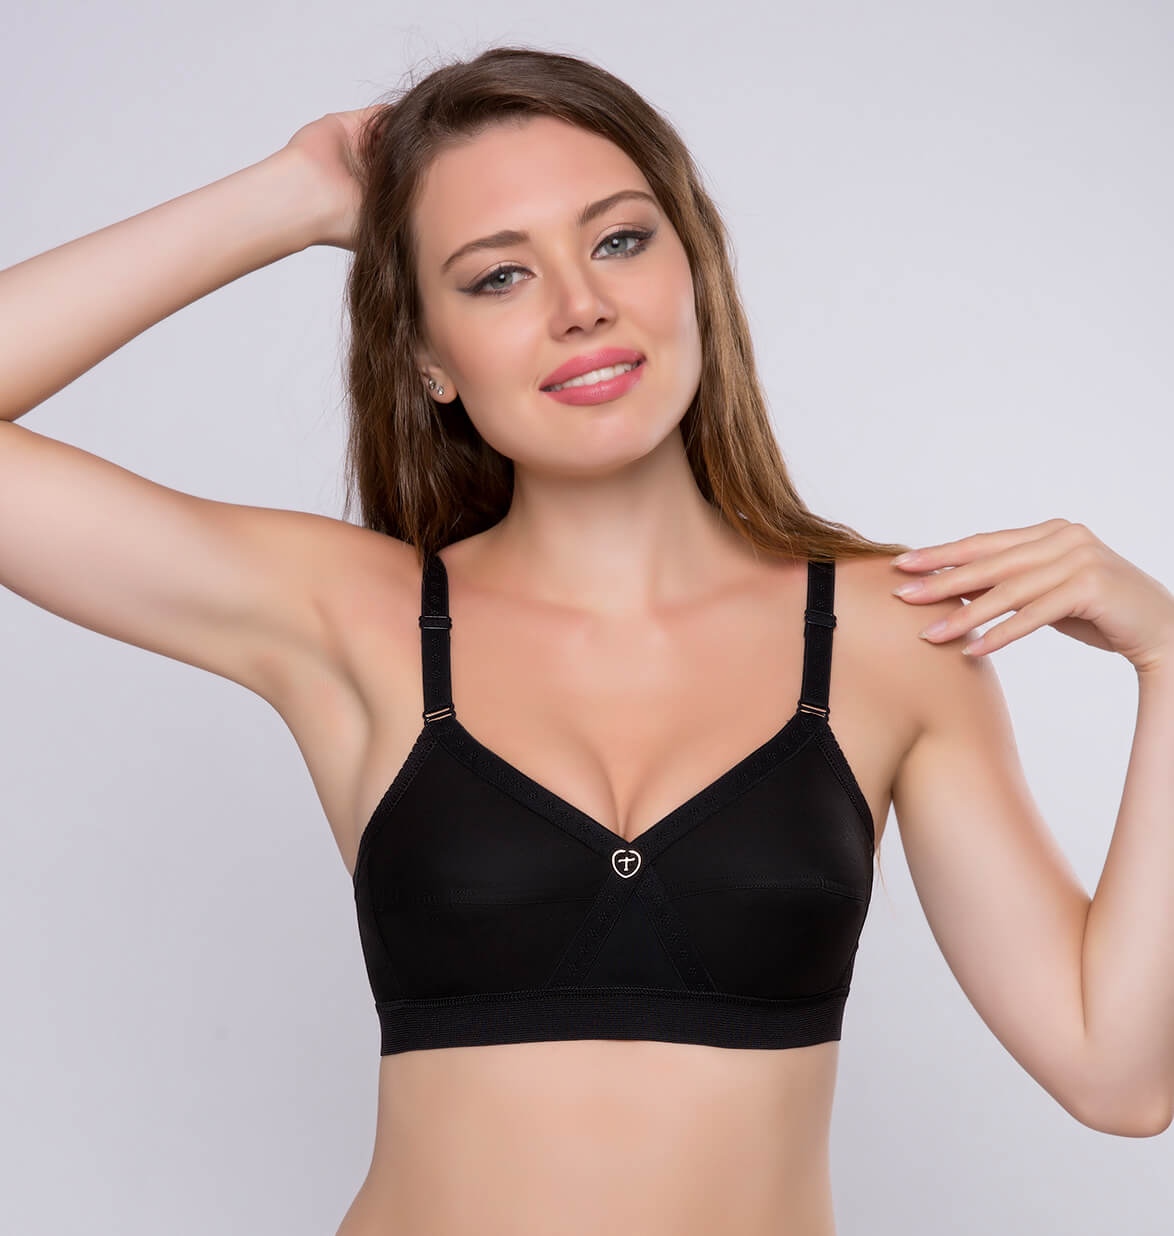 RIZA by TRYLO - Trylo is specially designed bra for routine